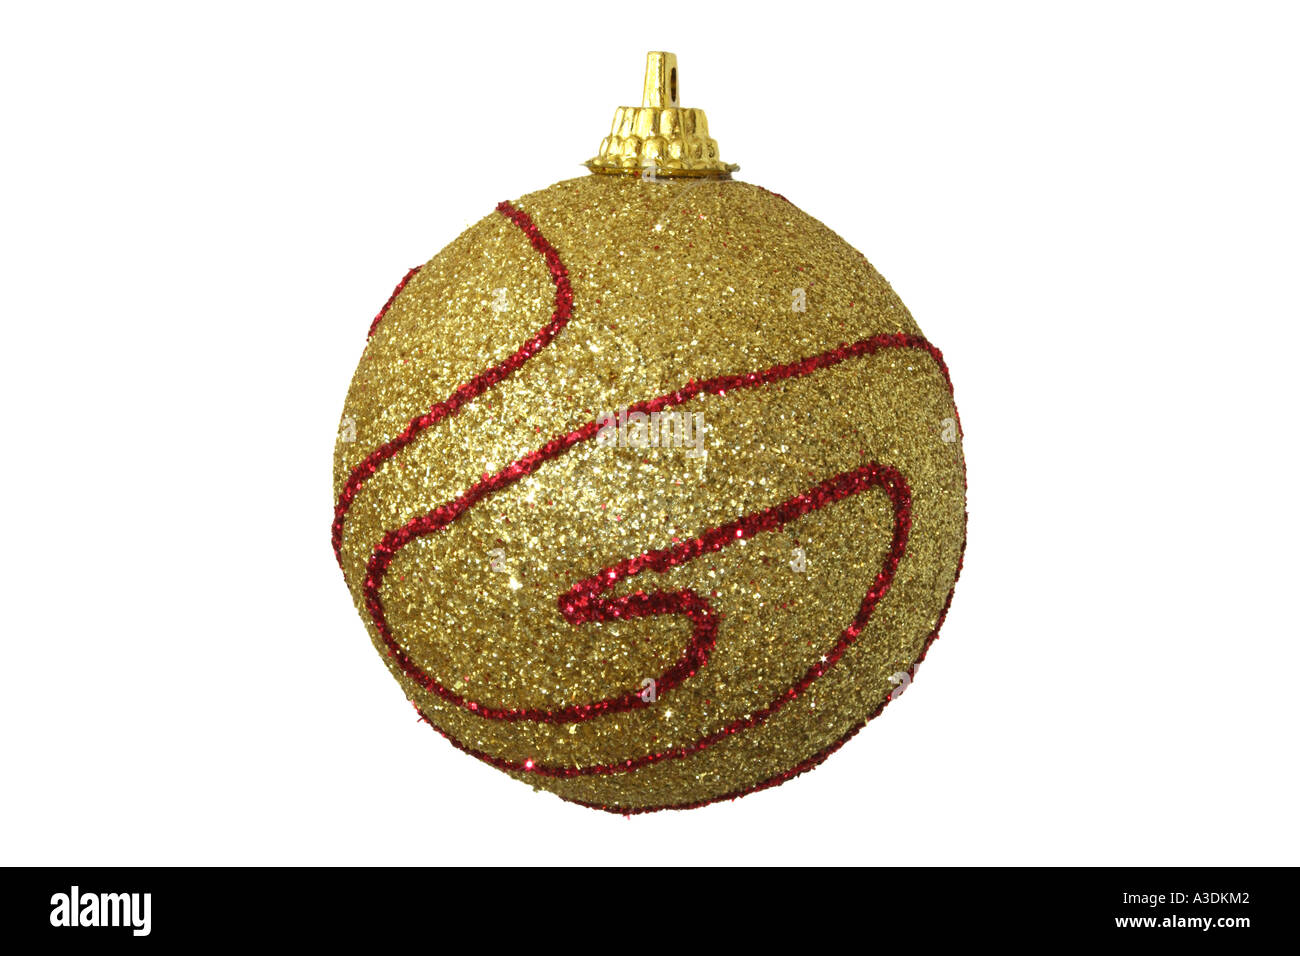 Glittered yellow christmas ball over a white background. Stock Photo